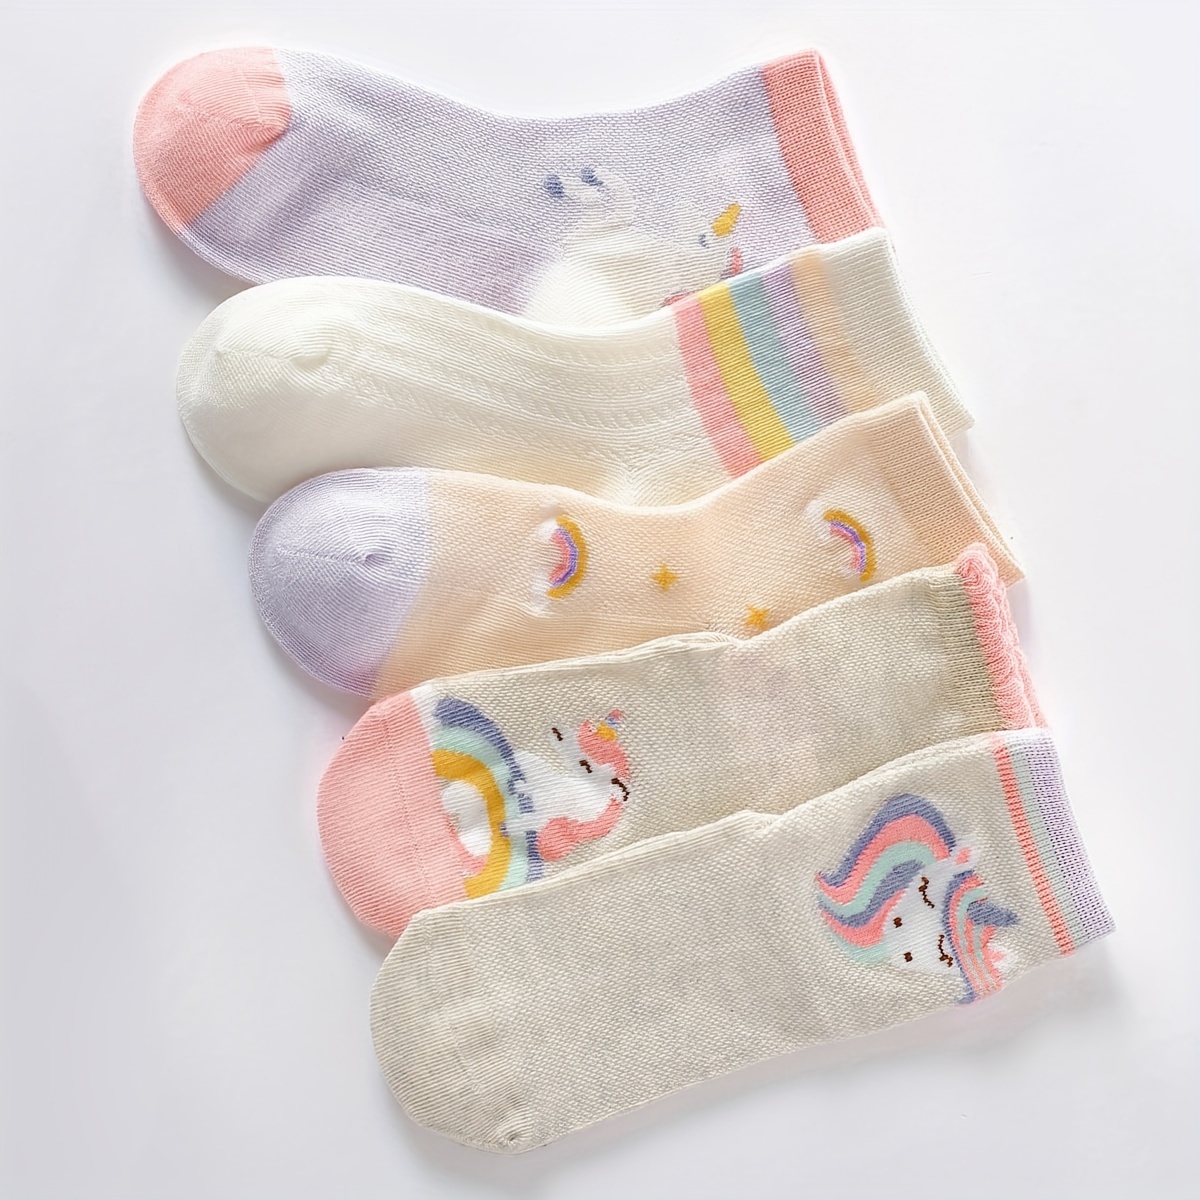 

5 Pairs Of Girl's Cotton Blend Fashion Cute Pattern Crew Socks, Comfy Breathable Thin Socks For Summer Daily Wearing